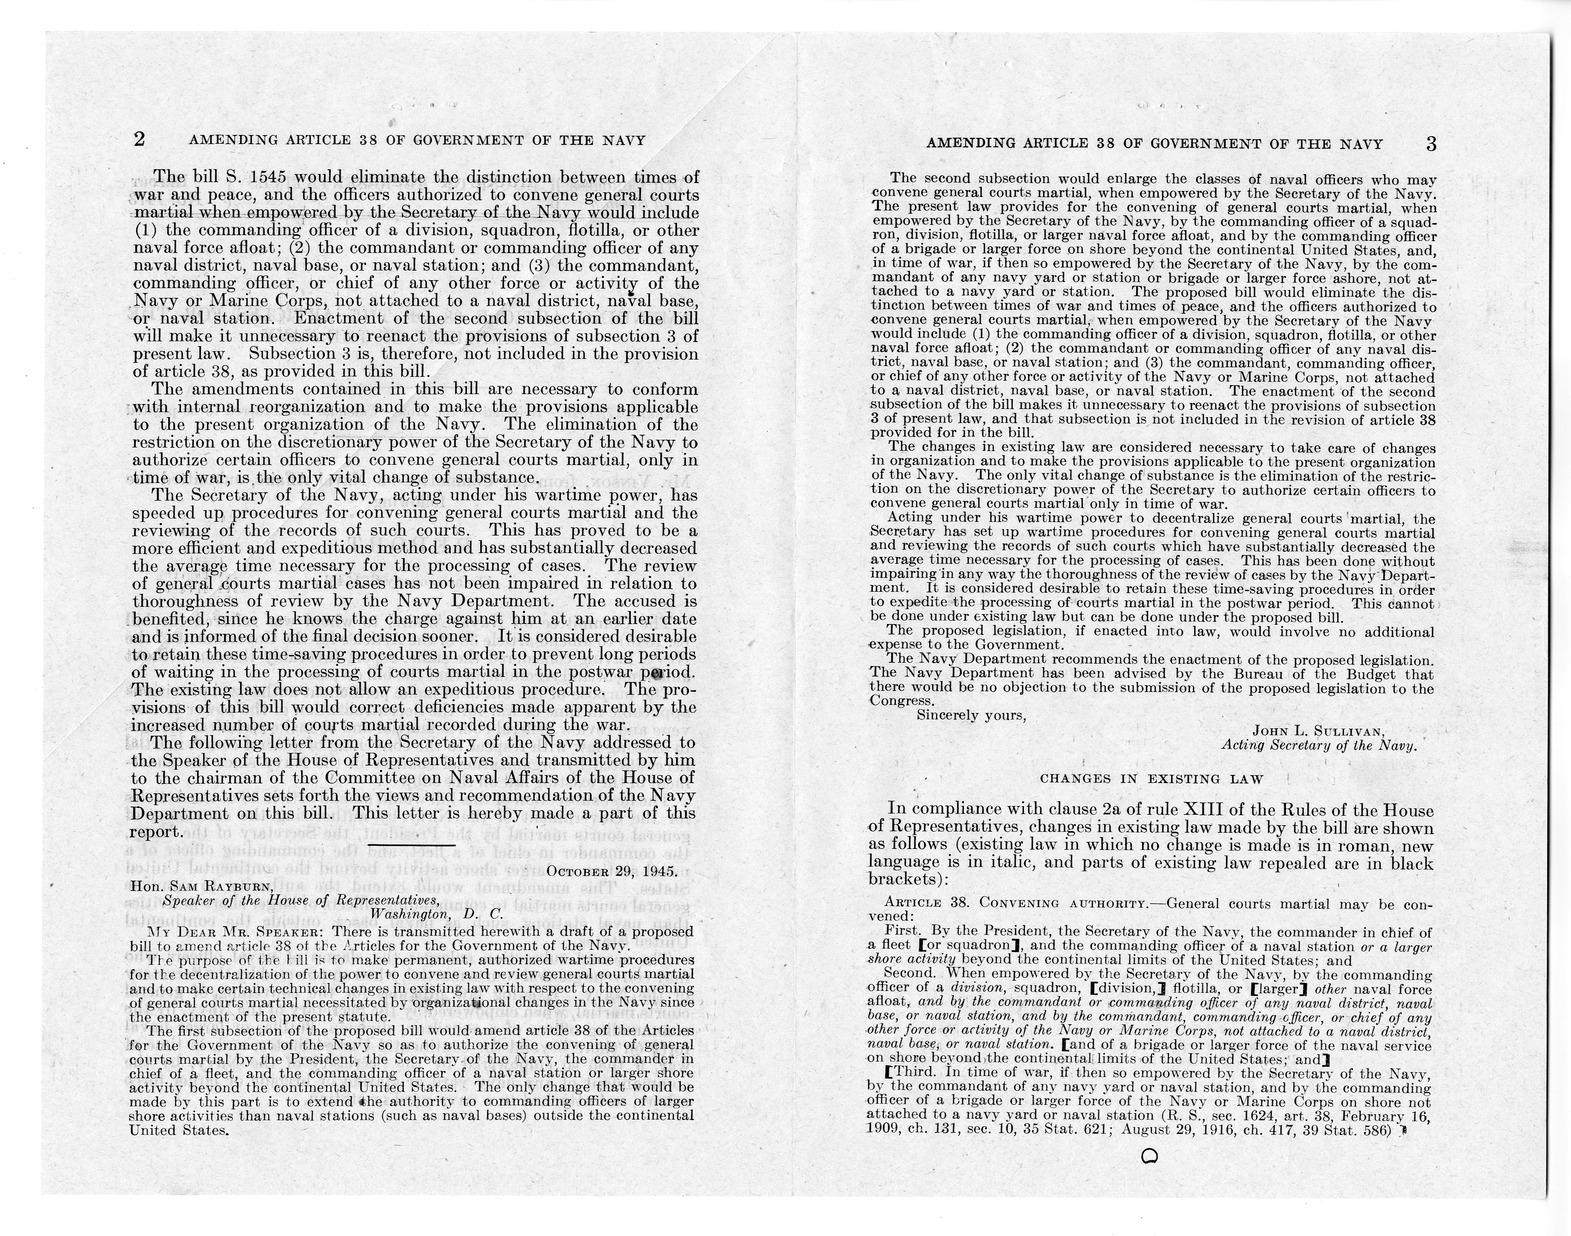 Memorandum from Harold D. Smith to M. C. Latta, S. 1545, To Amend Article 38 of the Articles for the Government of the Navy, with Attachments